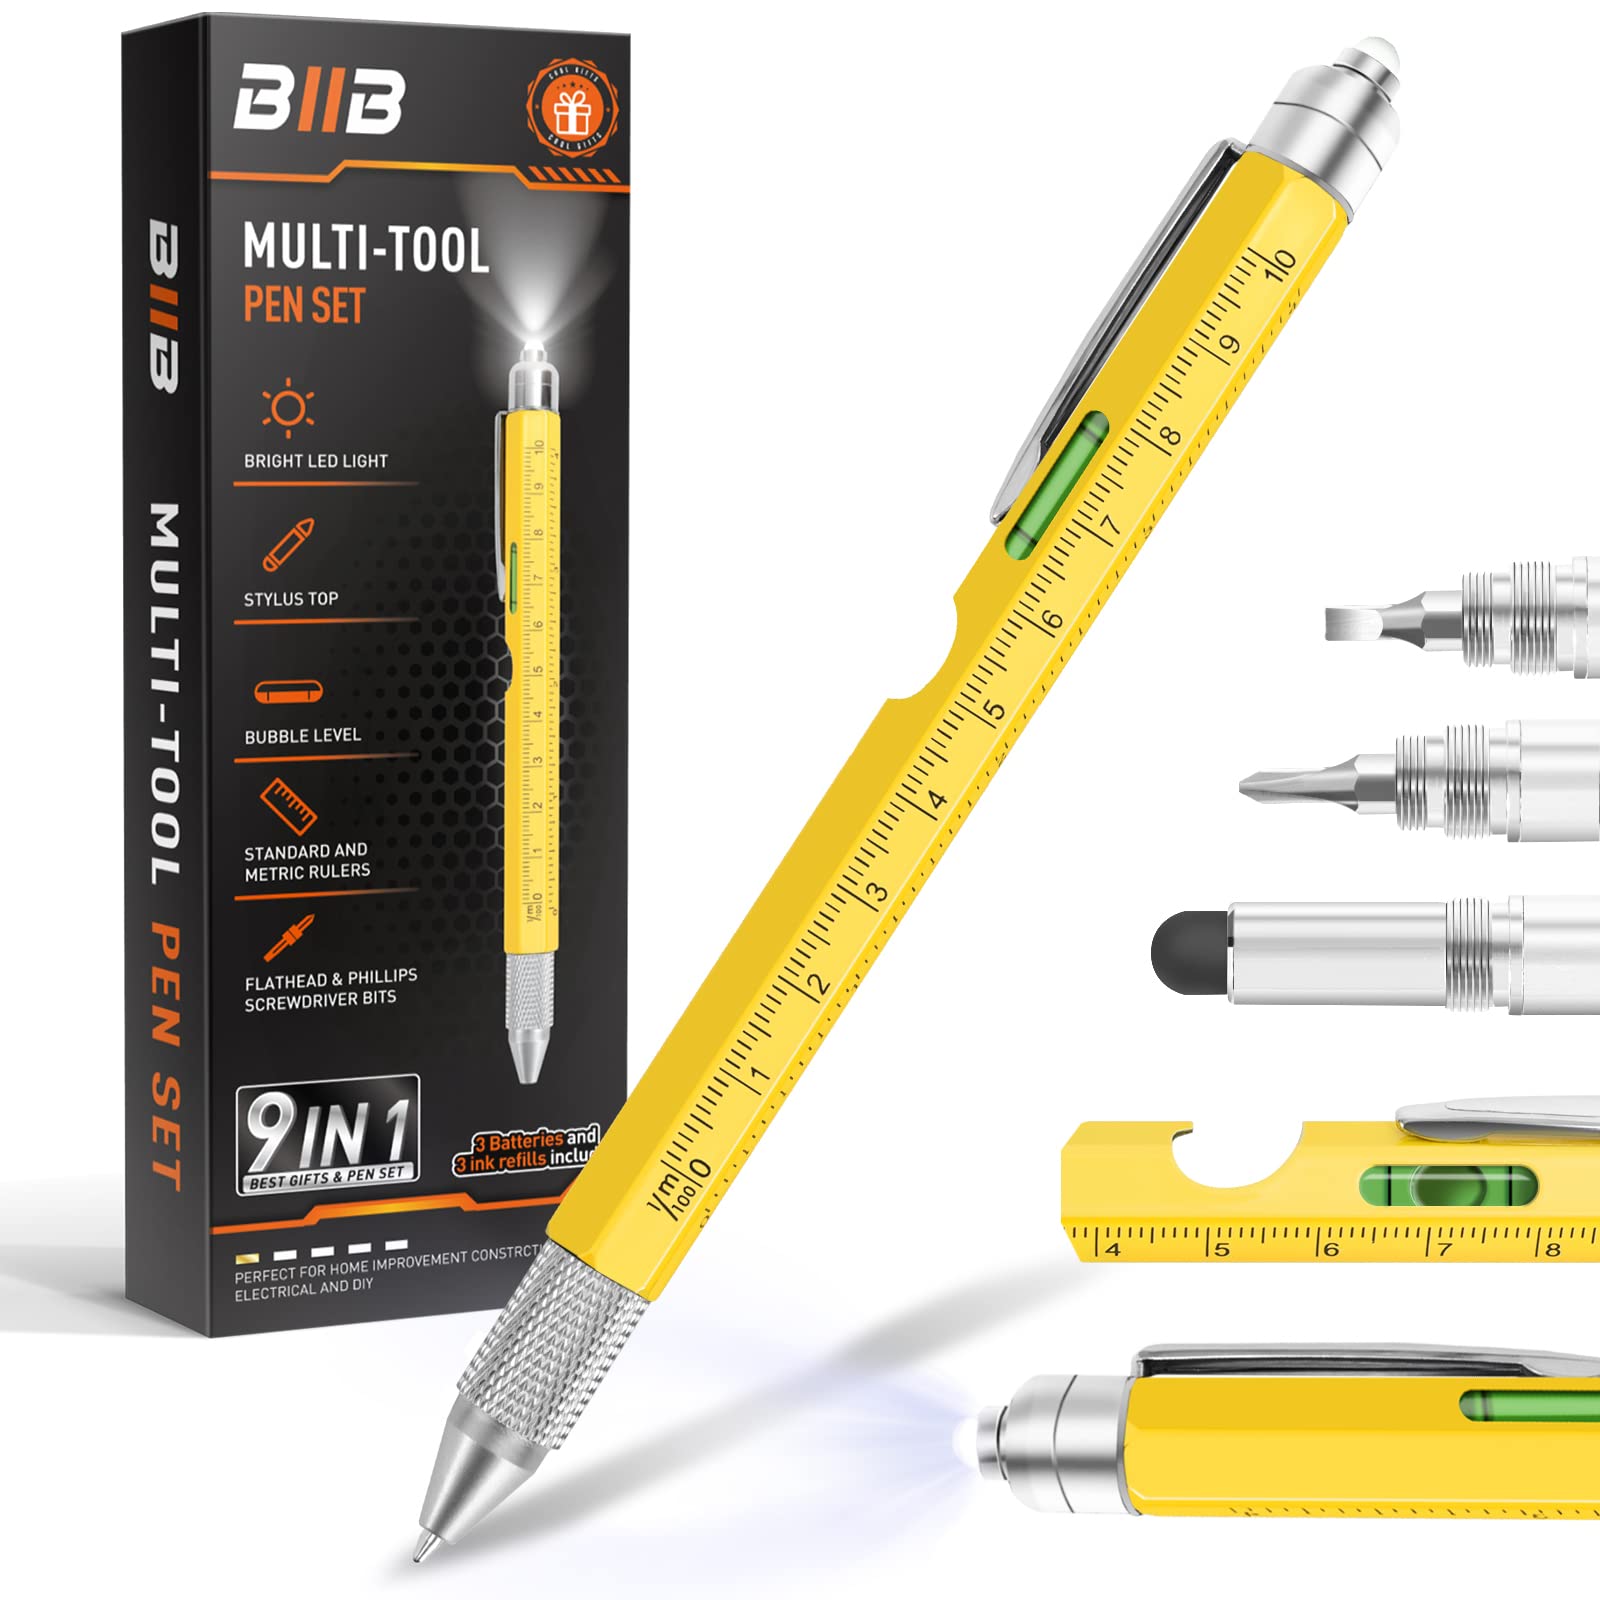 BIIB + Gifts for Dad, 9 in 1 Multitool Pen